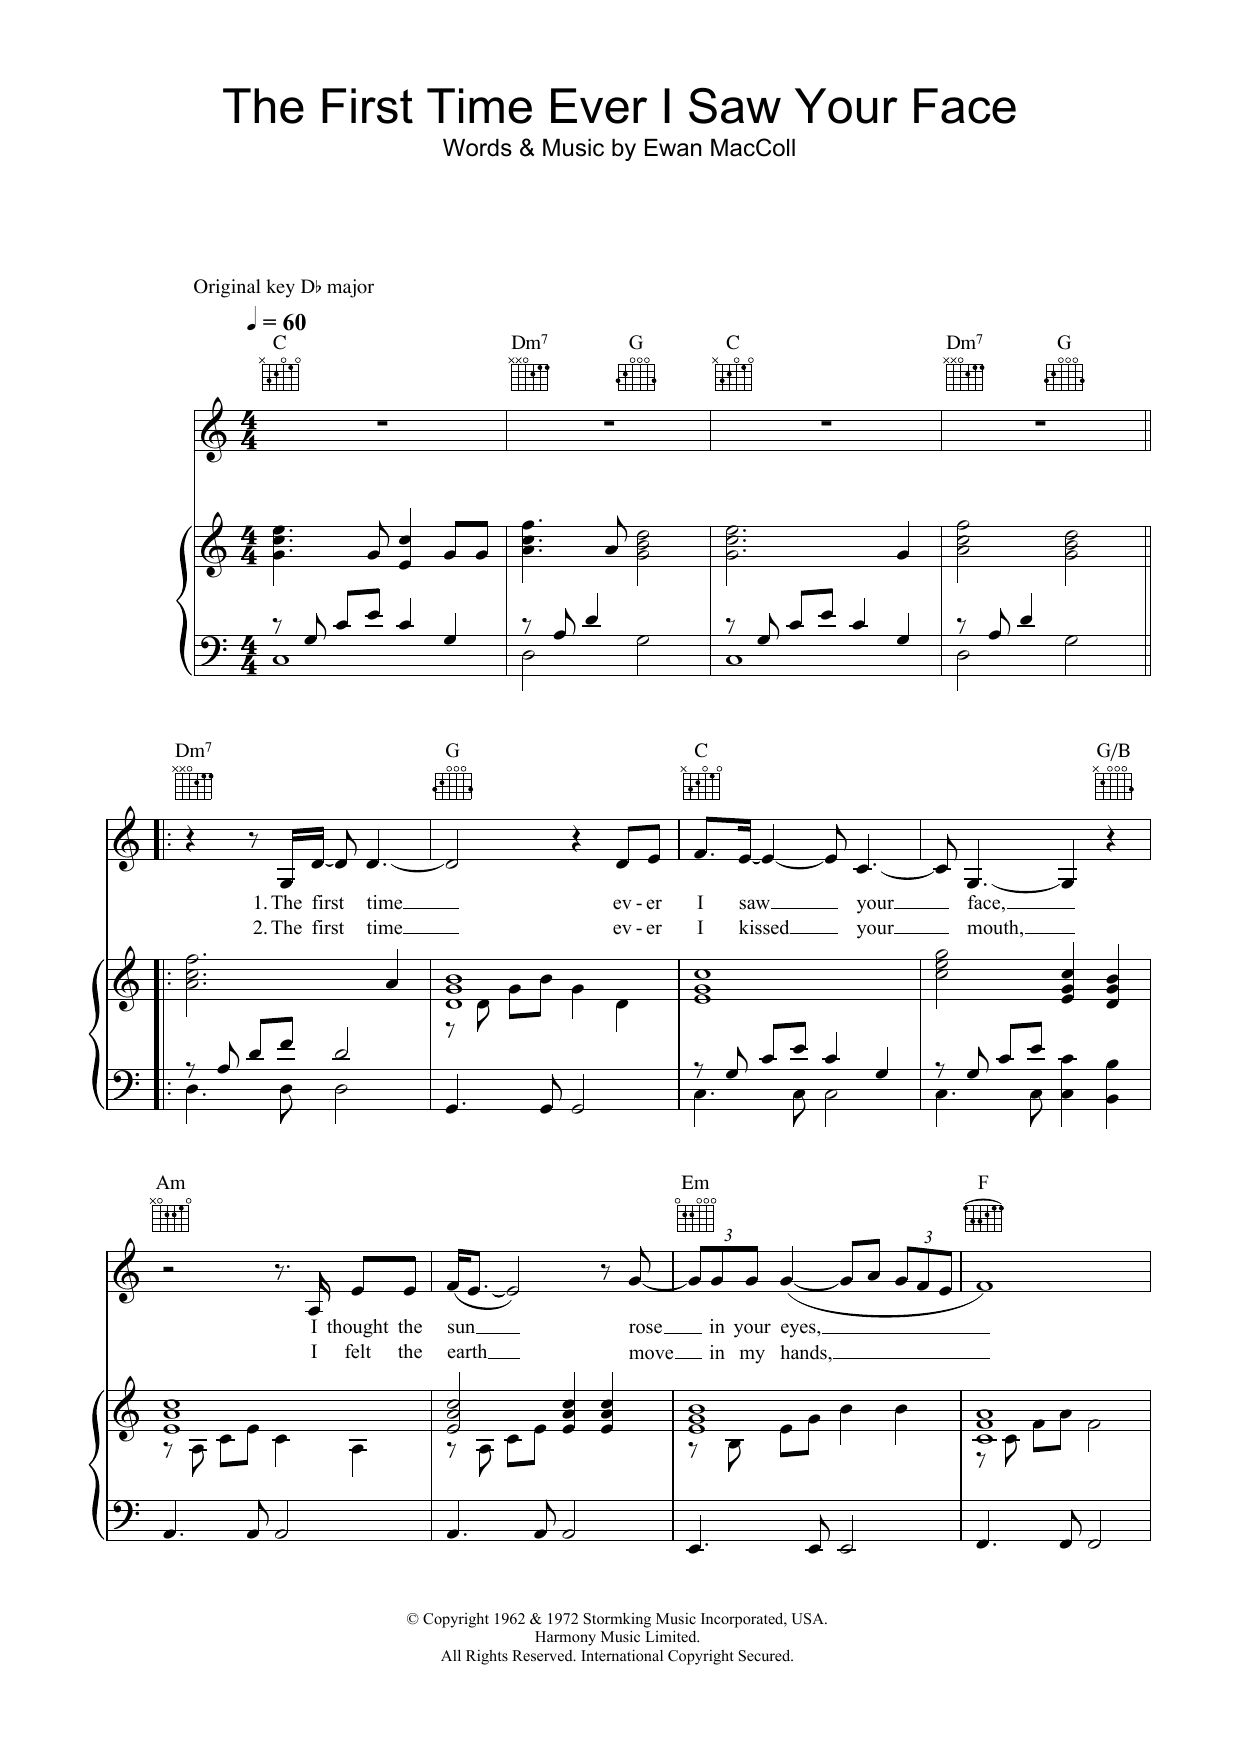 Leona Lewis The First Time Ever I Saw Your Face sheet music notes and chords. Download Printable PDF.